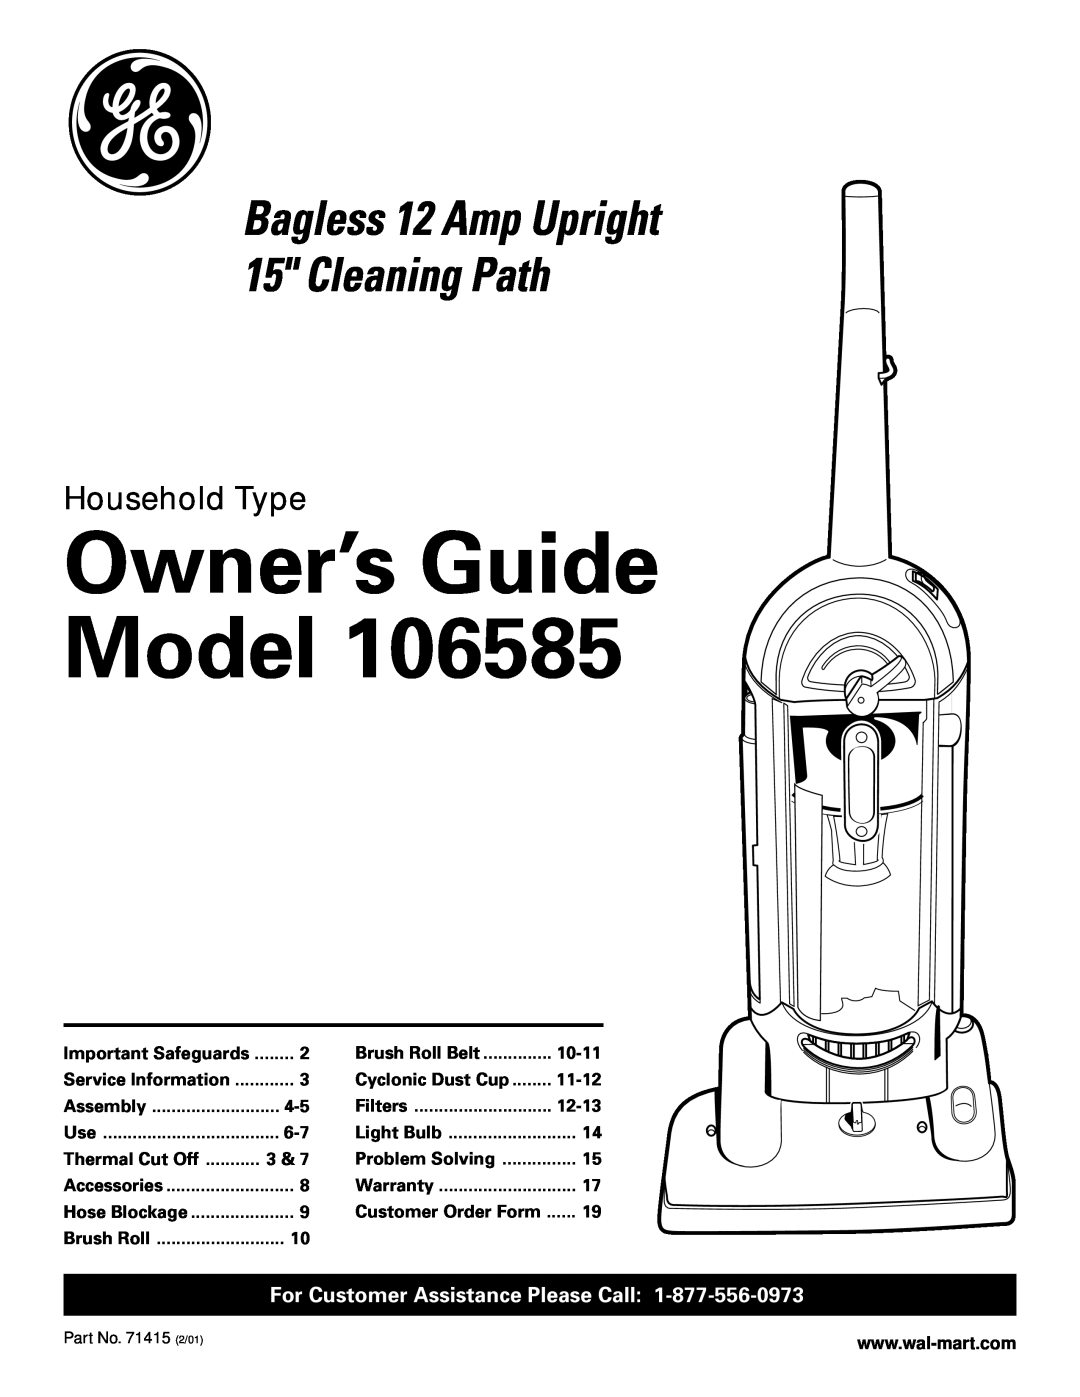 GE 71415 warranty Owner’s Guide Model, Household Type, For Customer Assistance Please Call, Important Safeguards, 10-11 